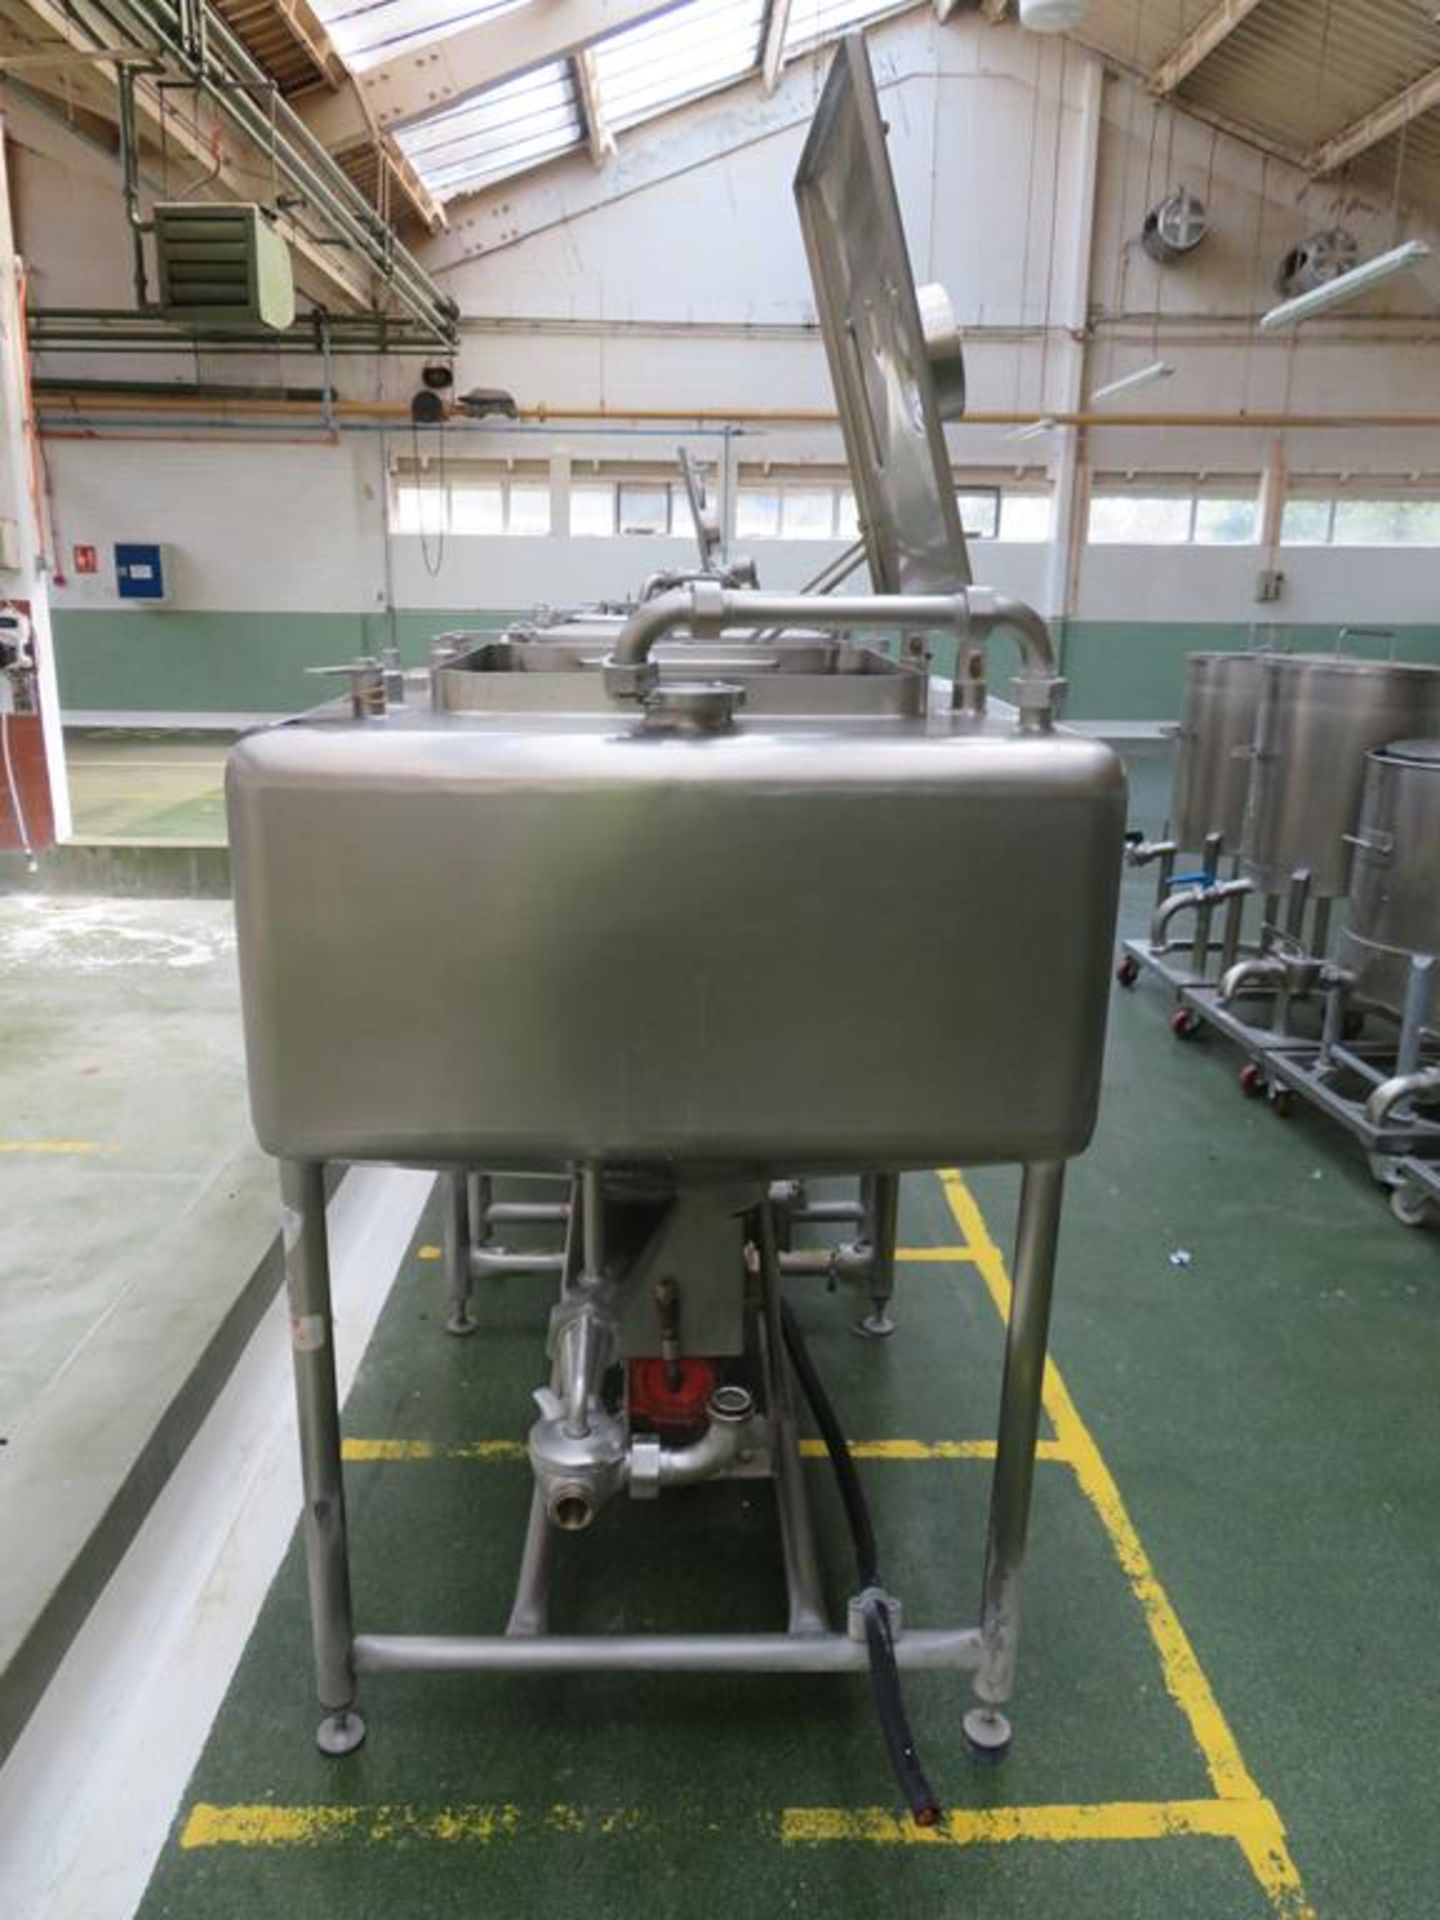 2 x Fat Mixing Tanks with Motor Driven Bottom Blade (1000 x 1000 x c700 mm deep) - Image 5 of 8